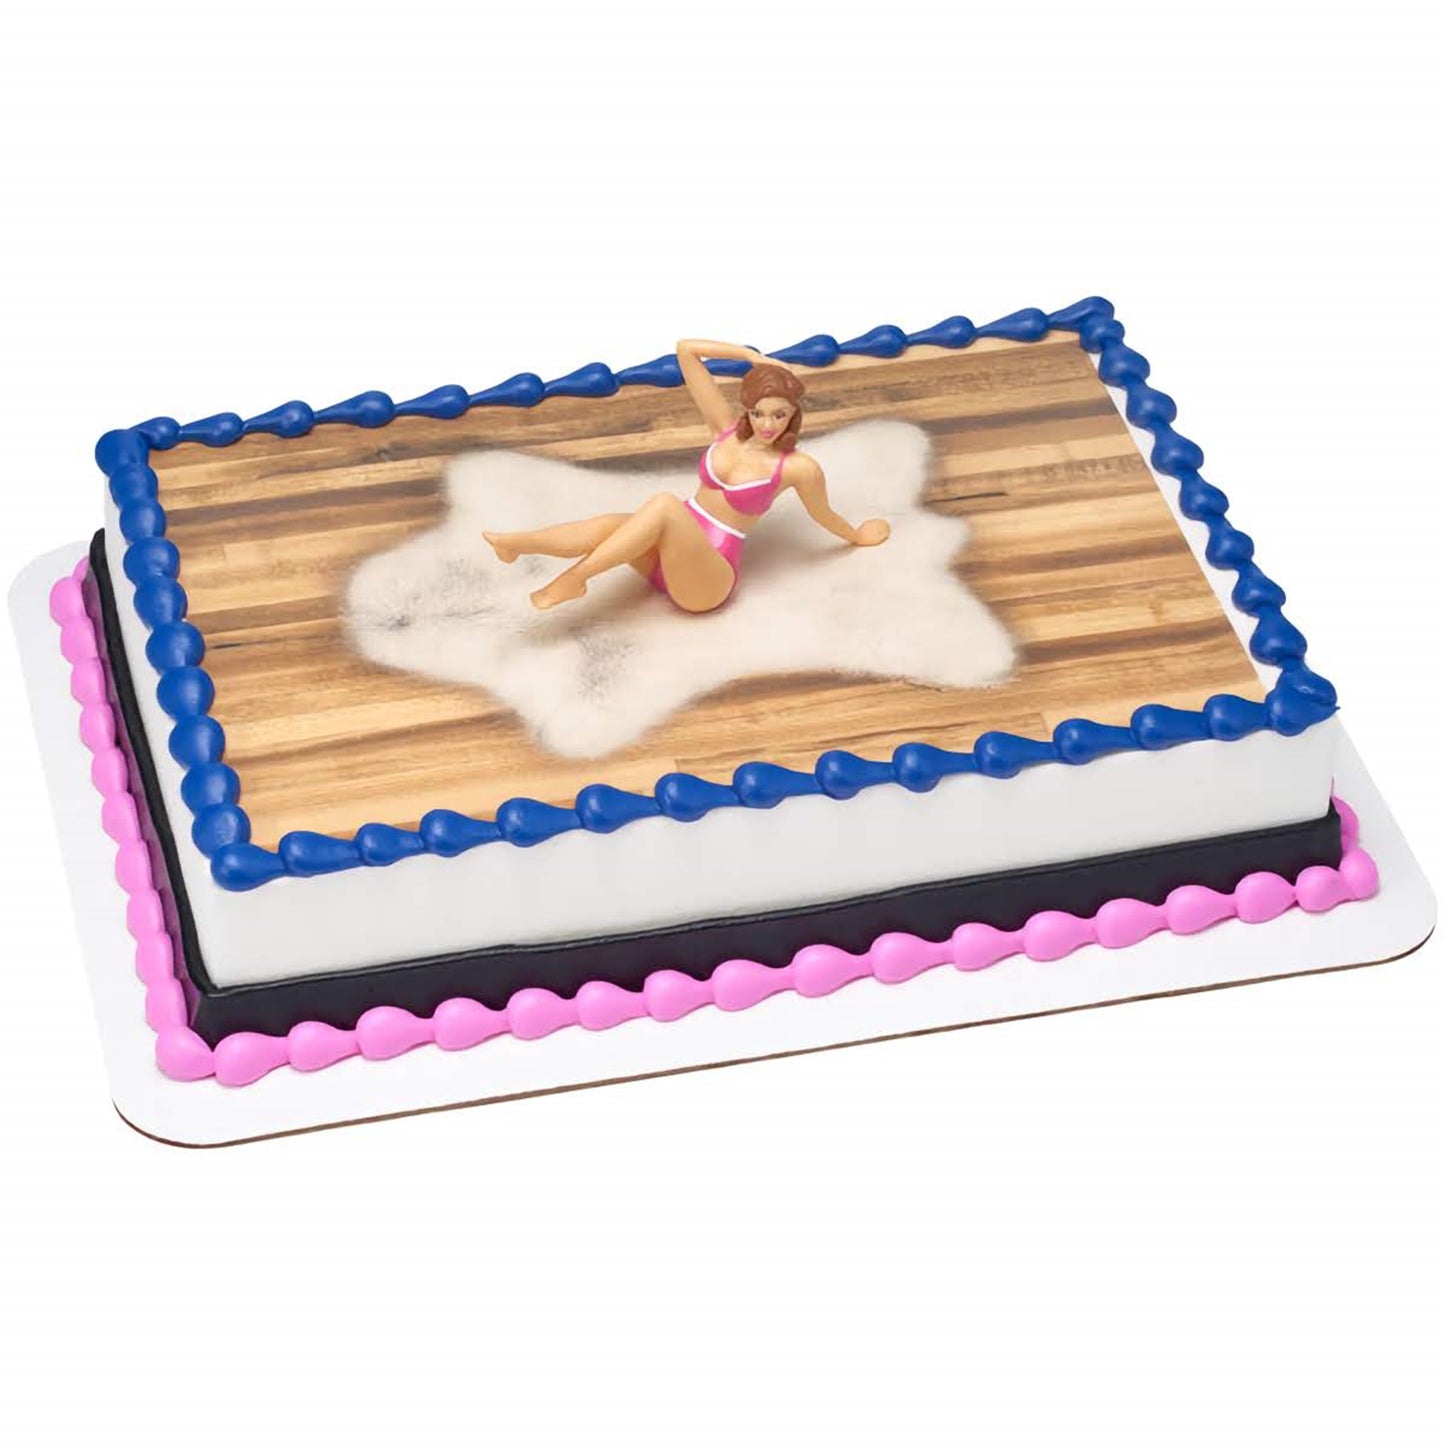 A whimsically decorated rectangular cake with a bikini woman topper, featuring a wooden deck icing design and blue border, available at Lynn's Cake, Candy, and Chocolate Supplies. It's a quirky addition to any summer pool party or a fun-filled adult celebration.